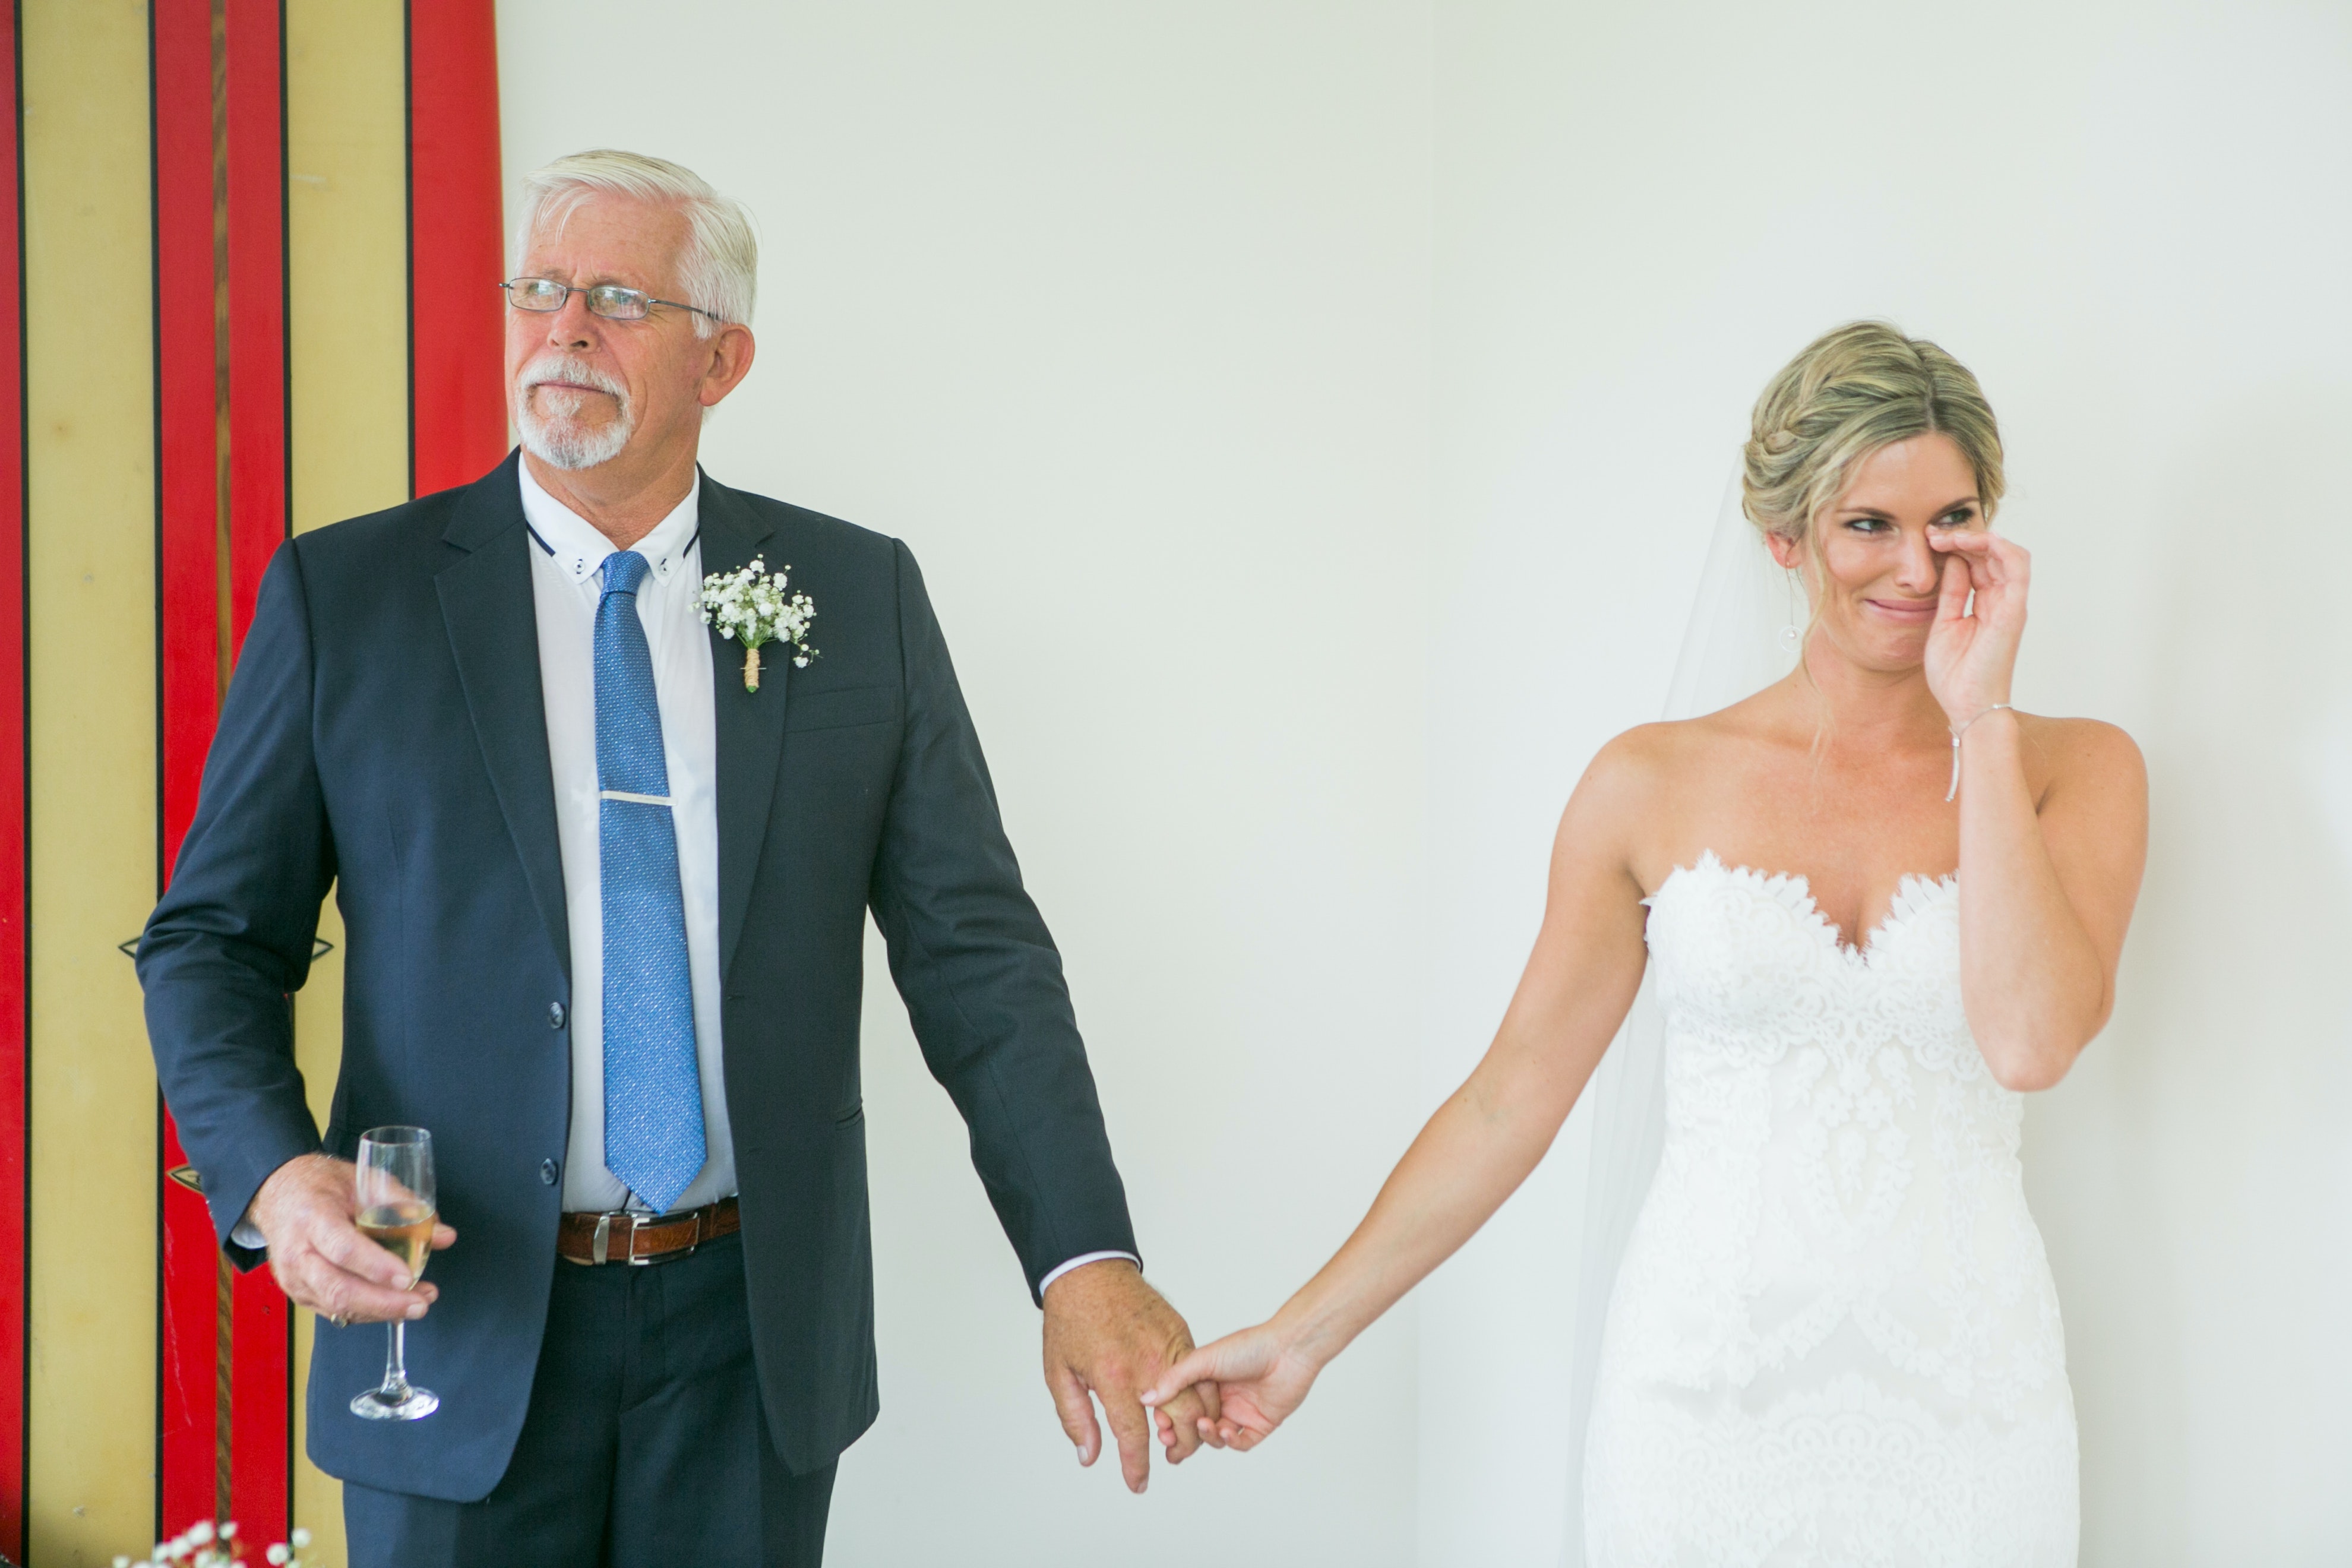 Emotional bride with father during wedding celebration | Source: Pexels